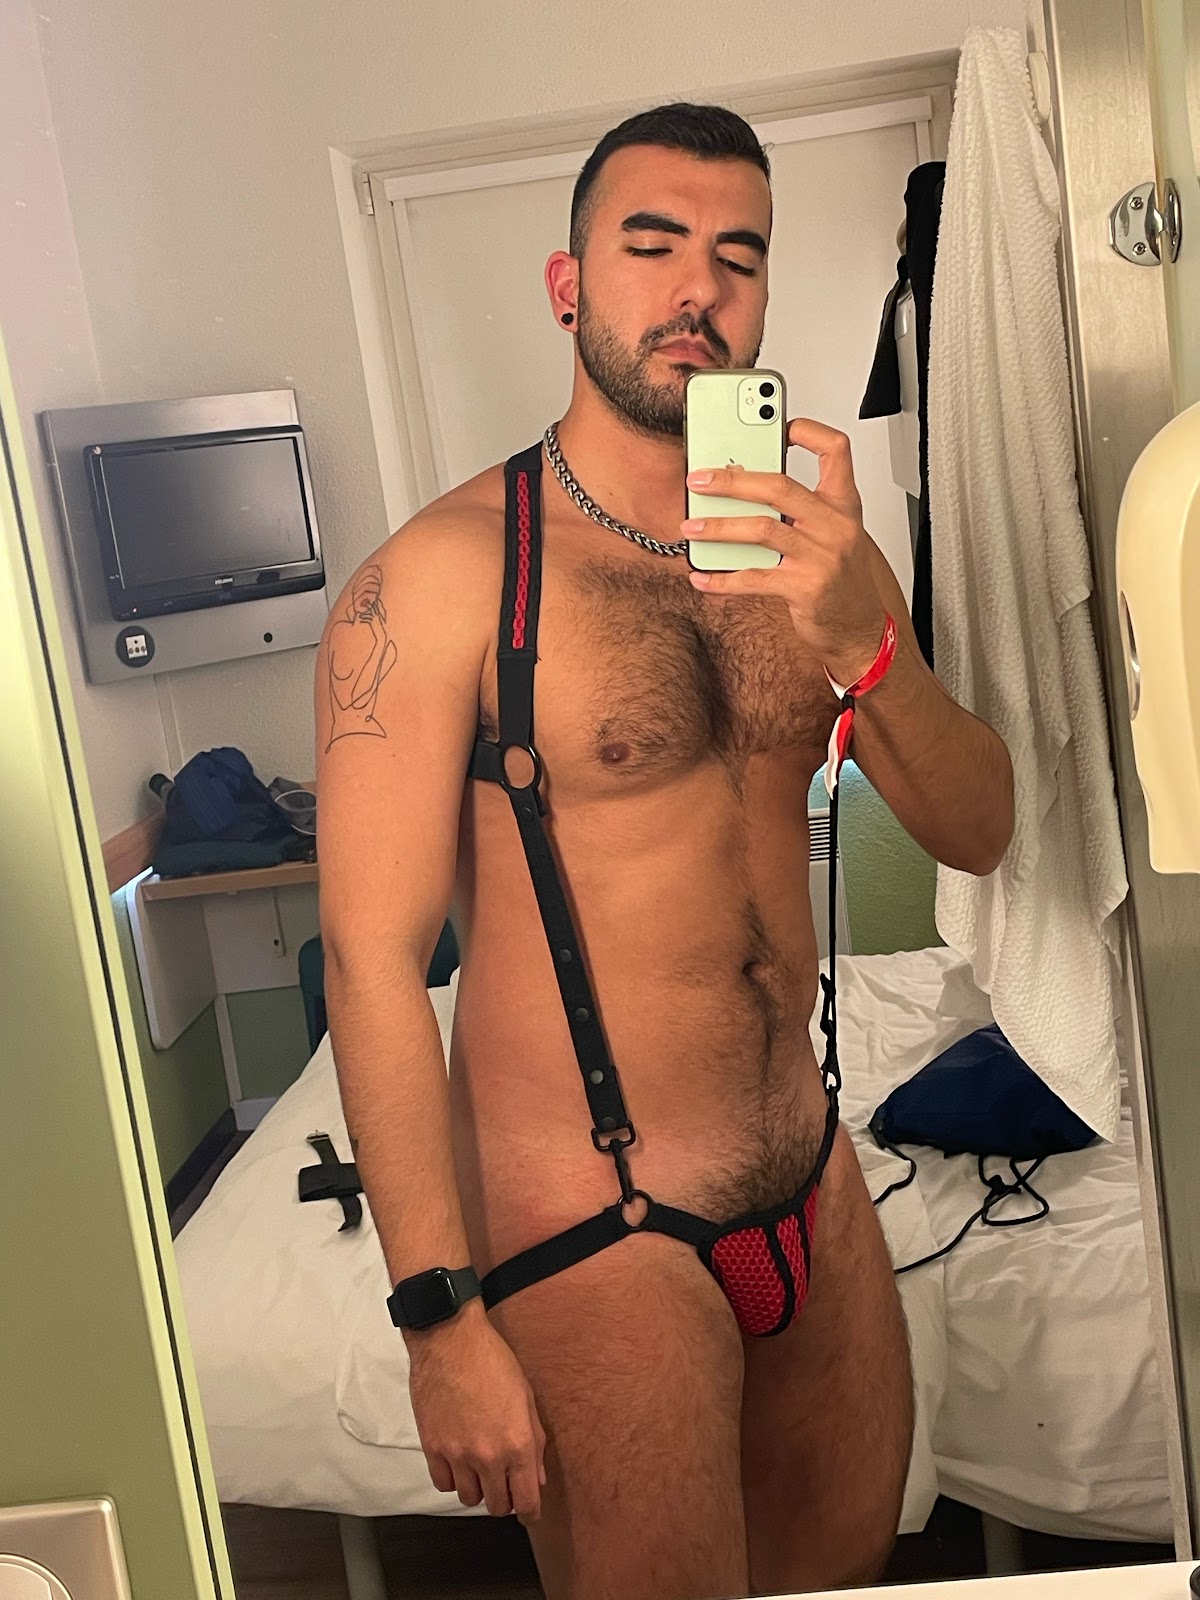 Onlyfans content creator Phil showing off his hairy chest and bush in red and black fetish harness with suspenders taking a selfie in his Belgium hotel room